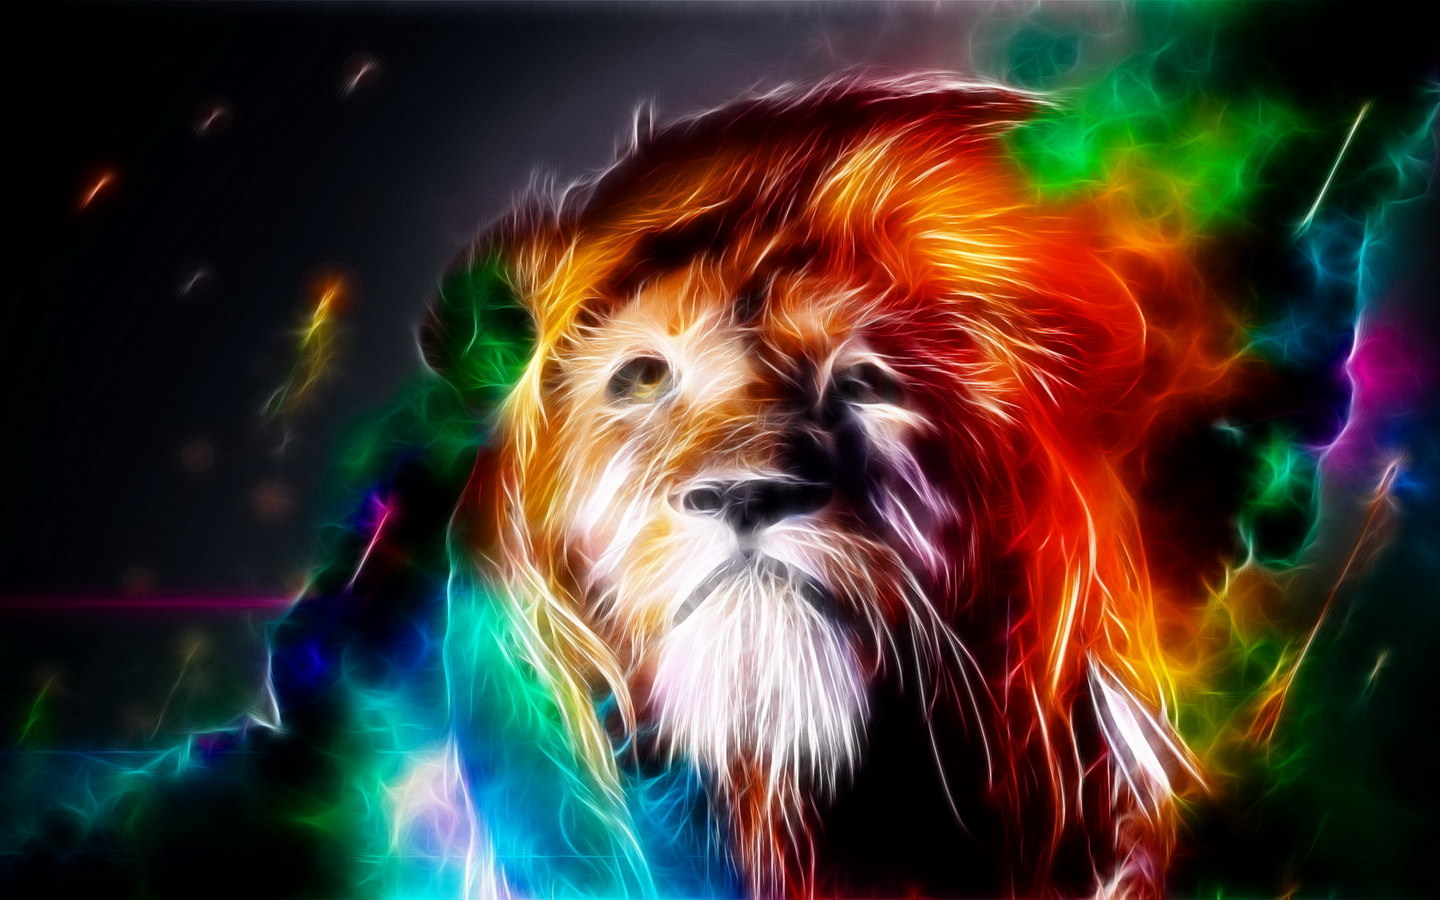 3d Abstract Art Lion Model Images - Awesome Lion - HD Wallpaper 